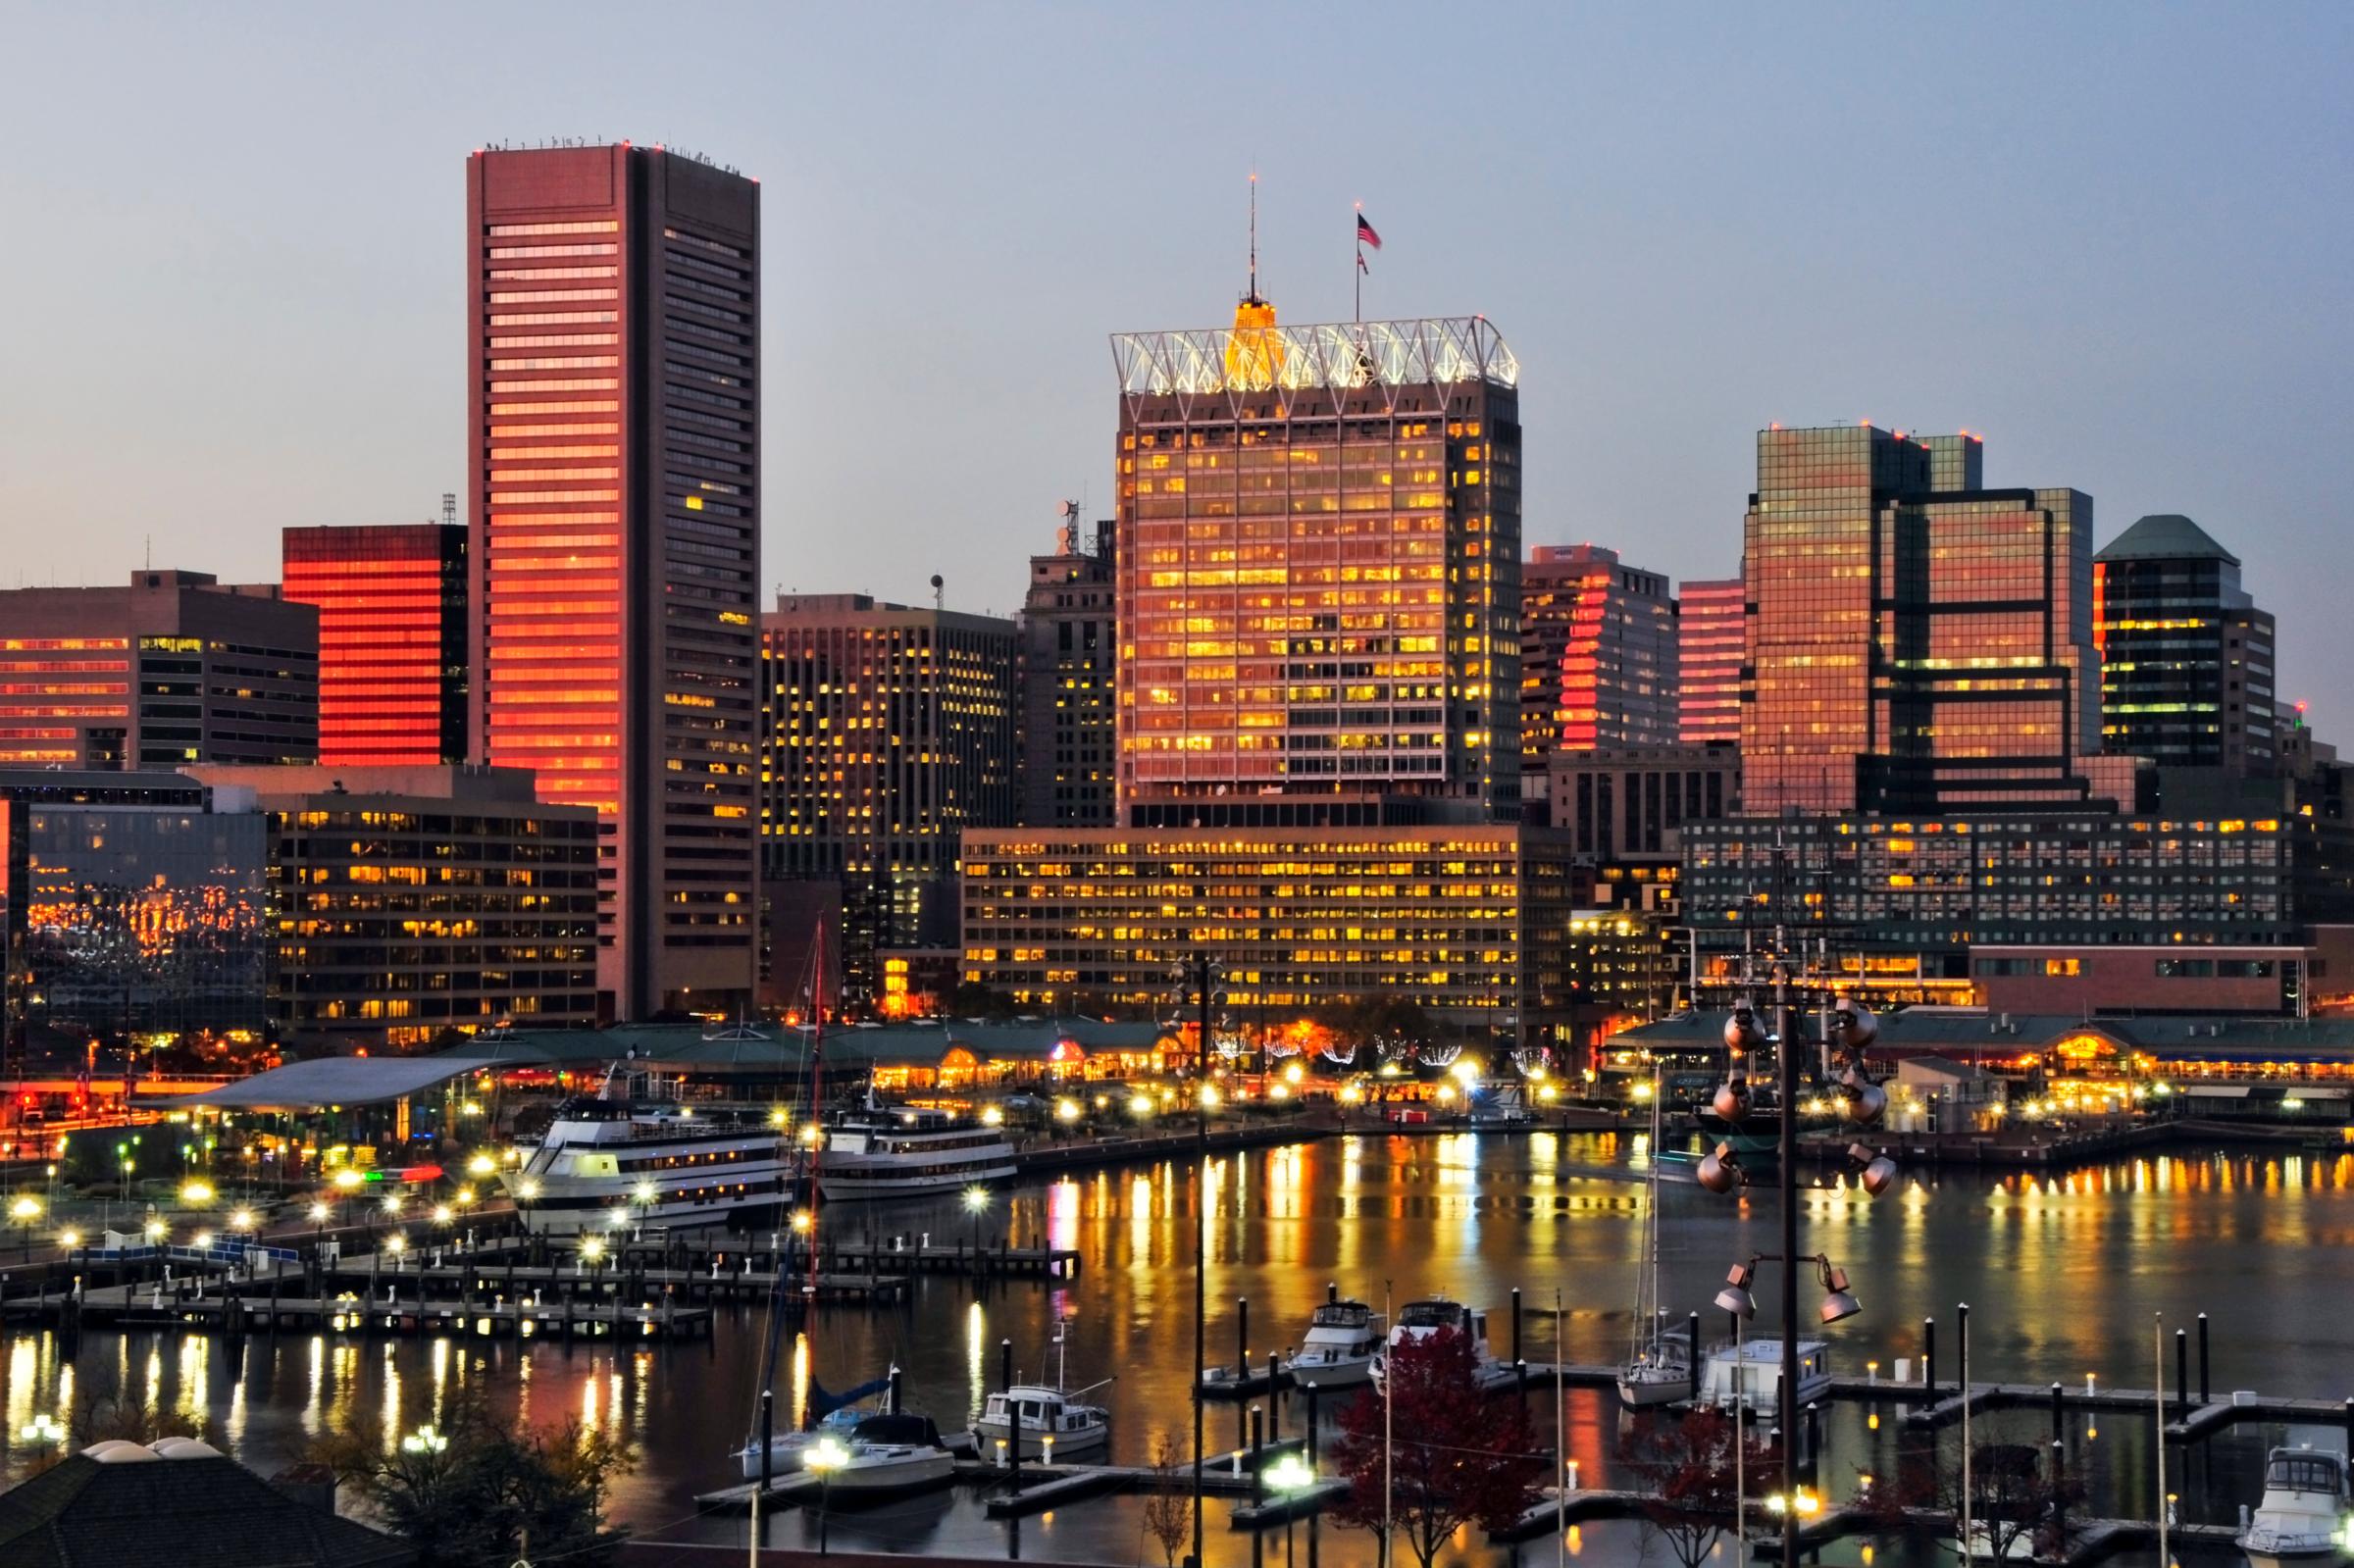 The sunset reflects off the windows of the Baltimore city skyline at dusk, Maryland.